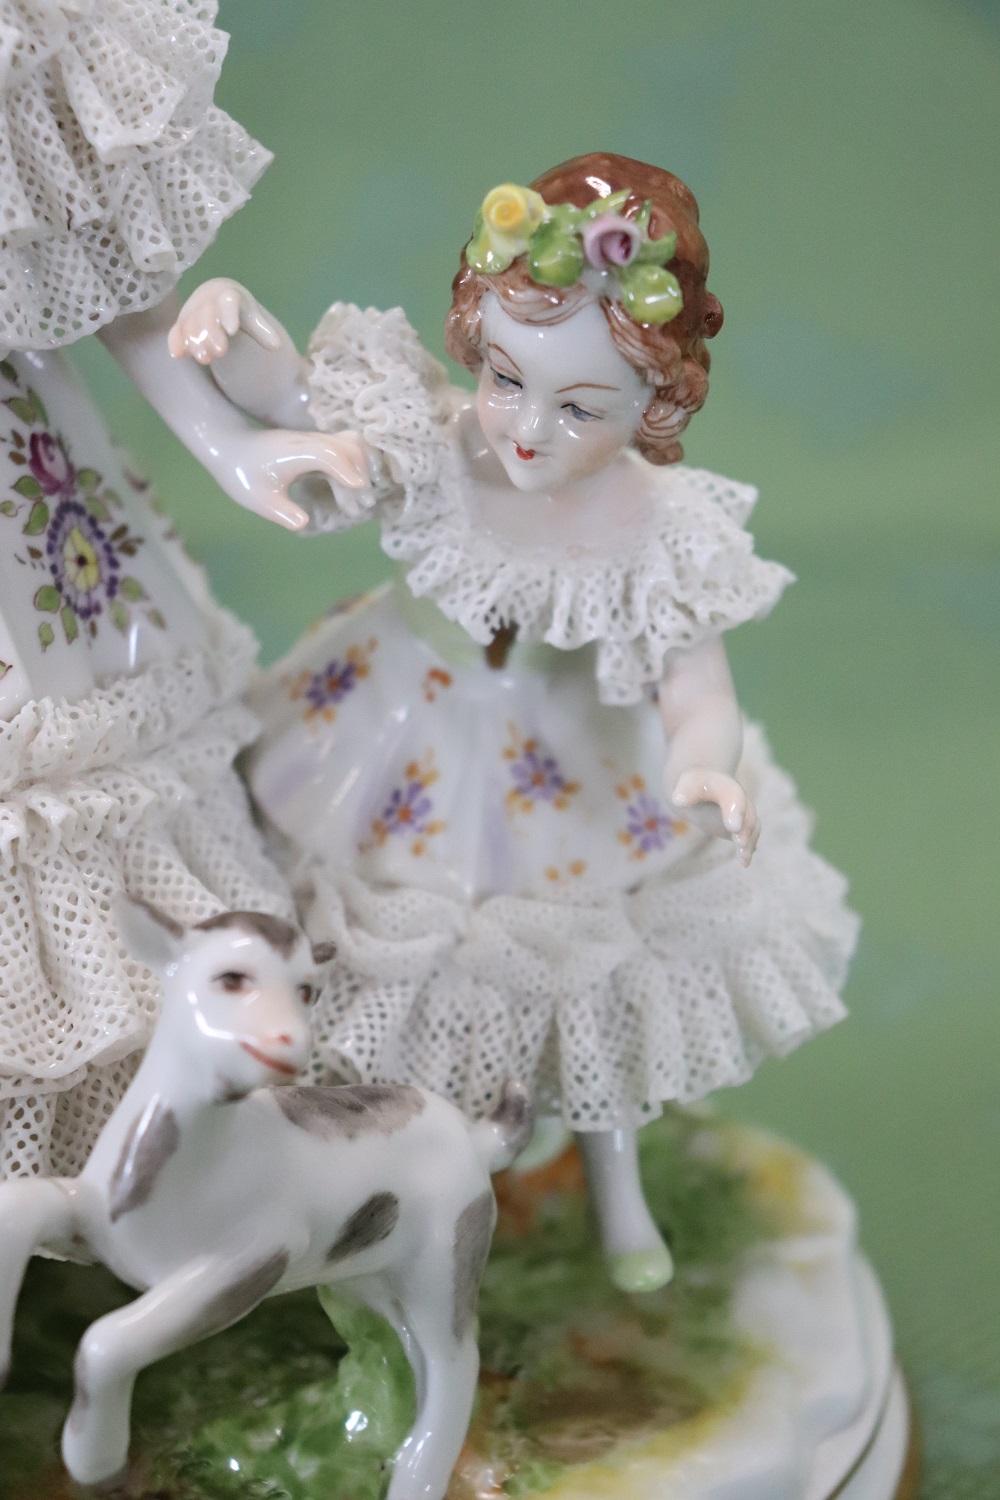 Hand-Painted 19th Century Italian Antique Porcelain Sculpture by Capodimonte For Sale